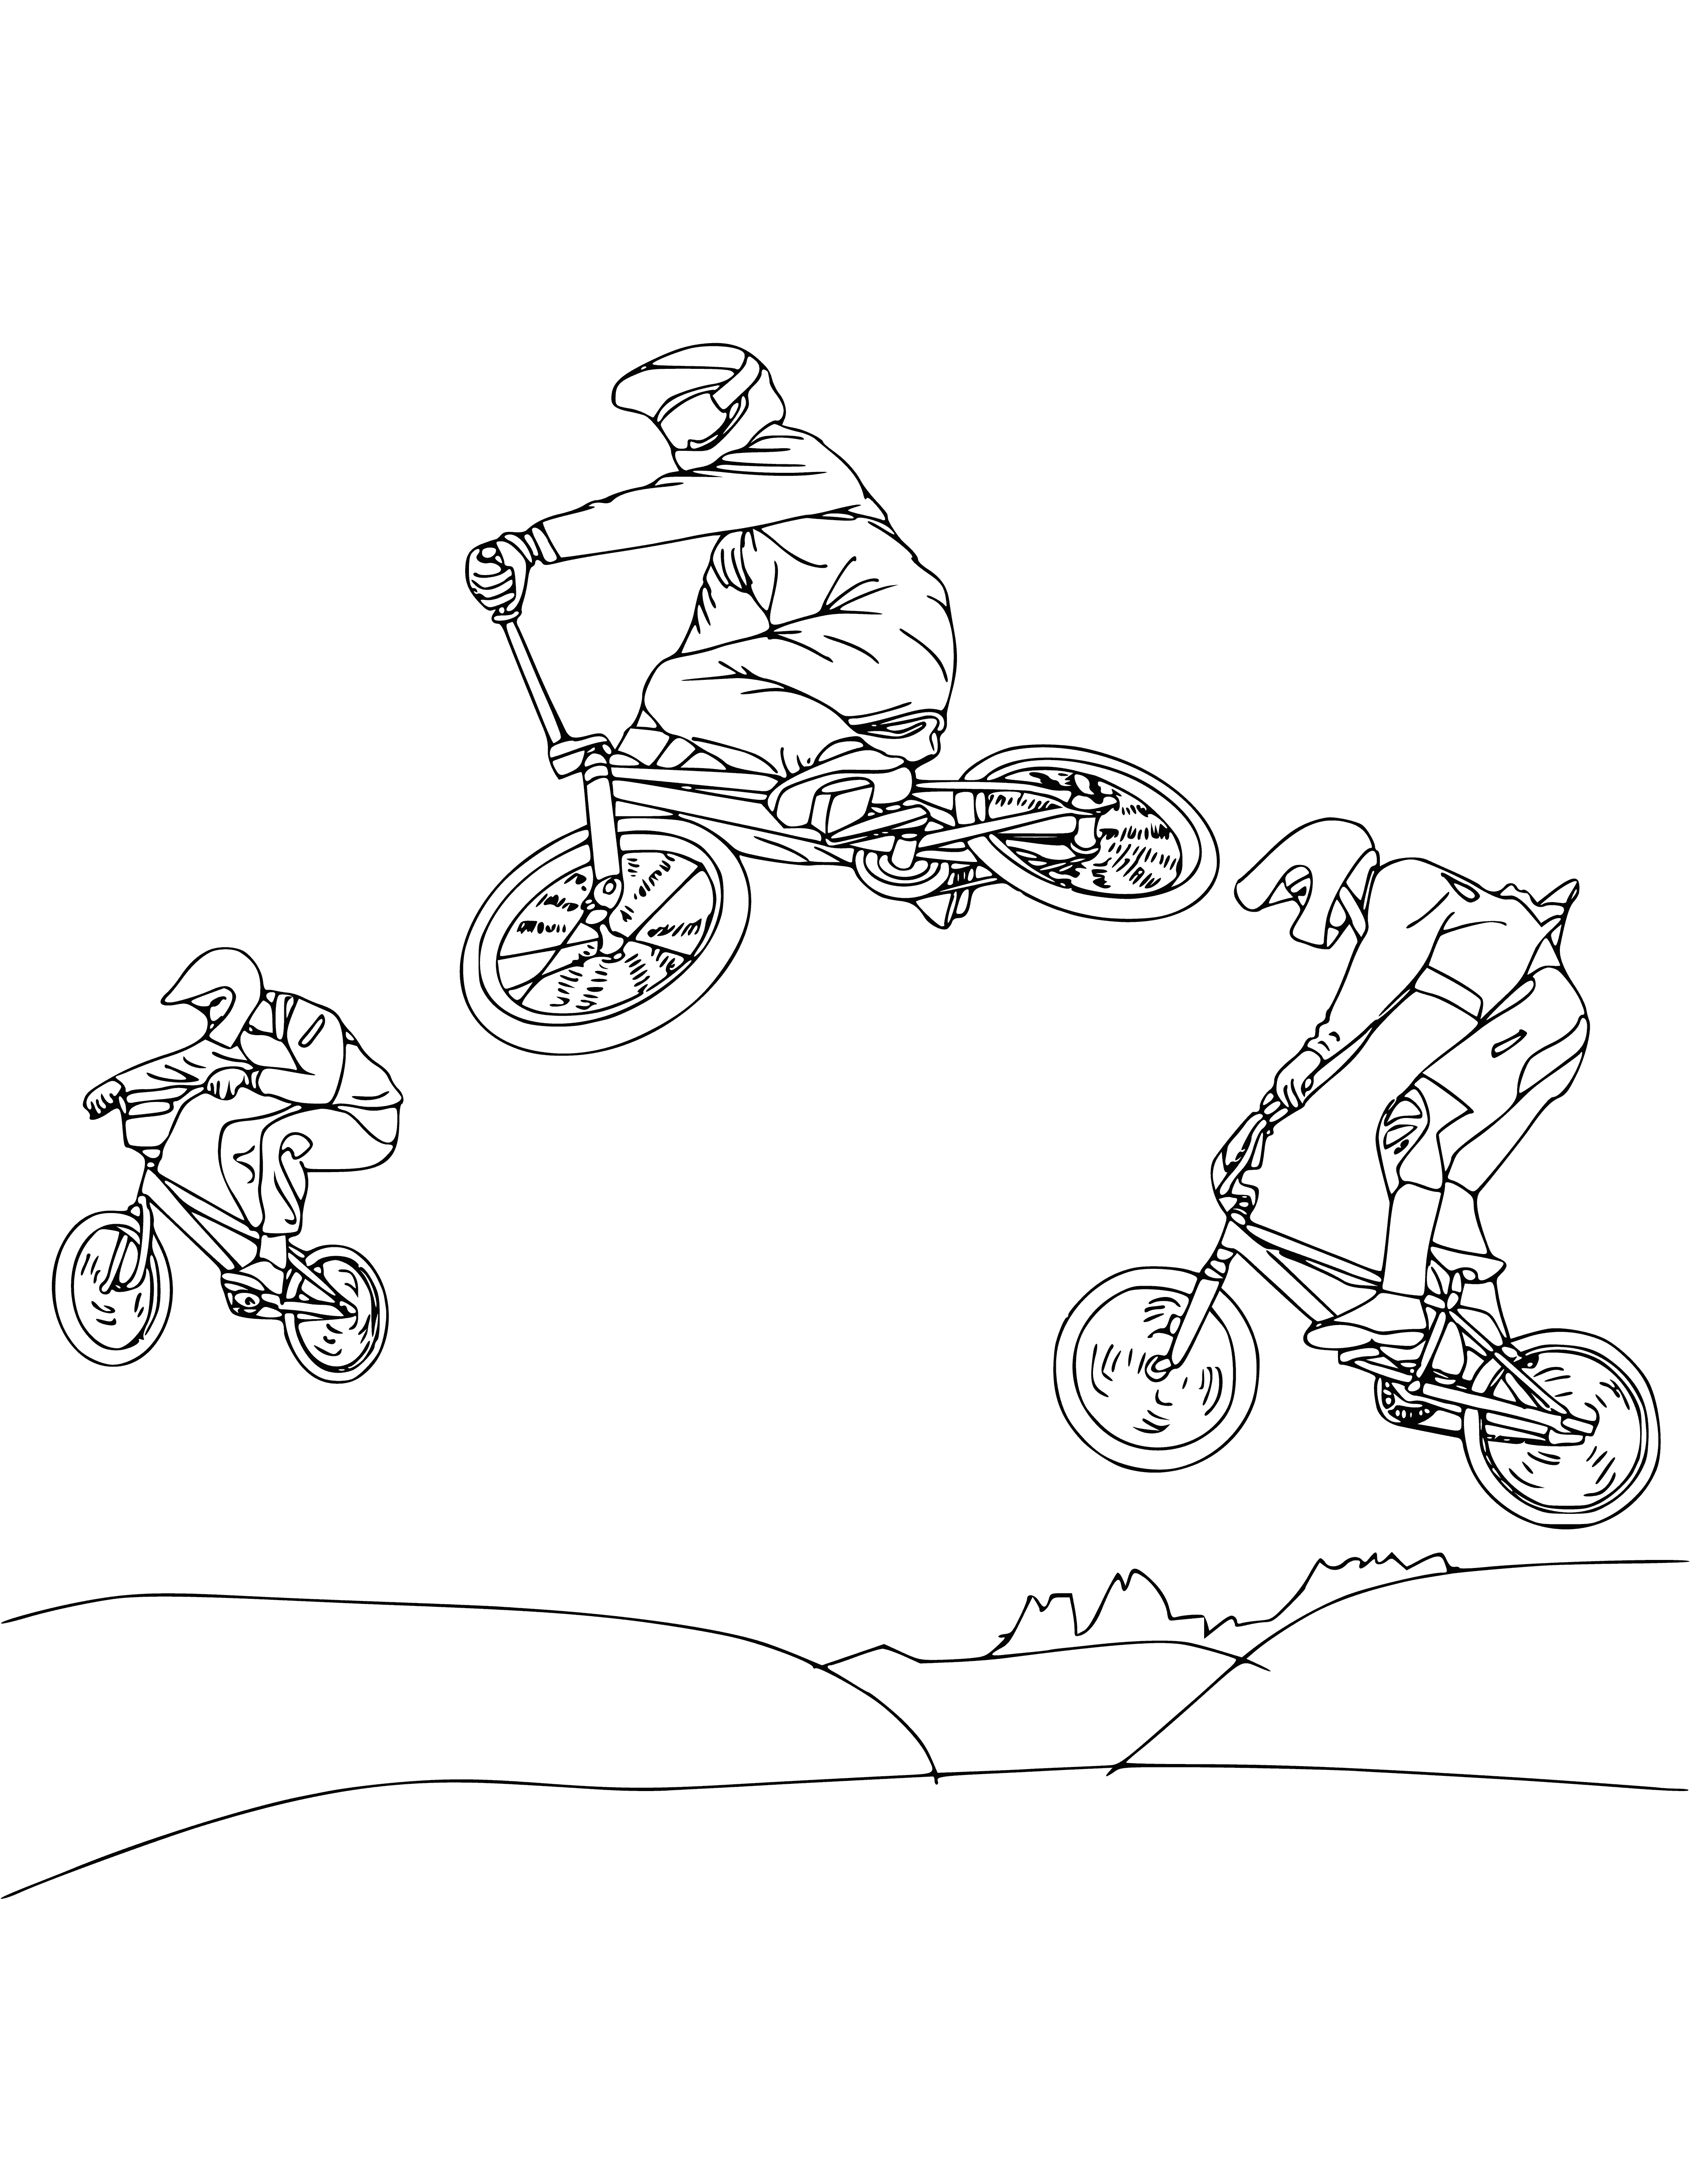 Freestyle cycling coloring page